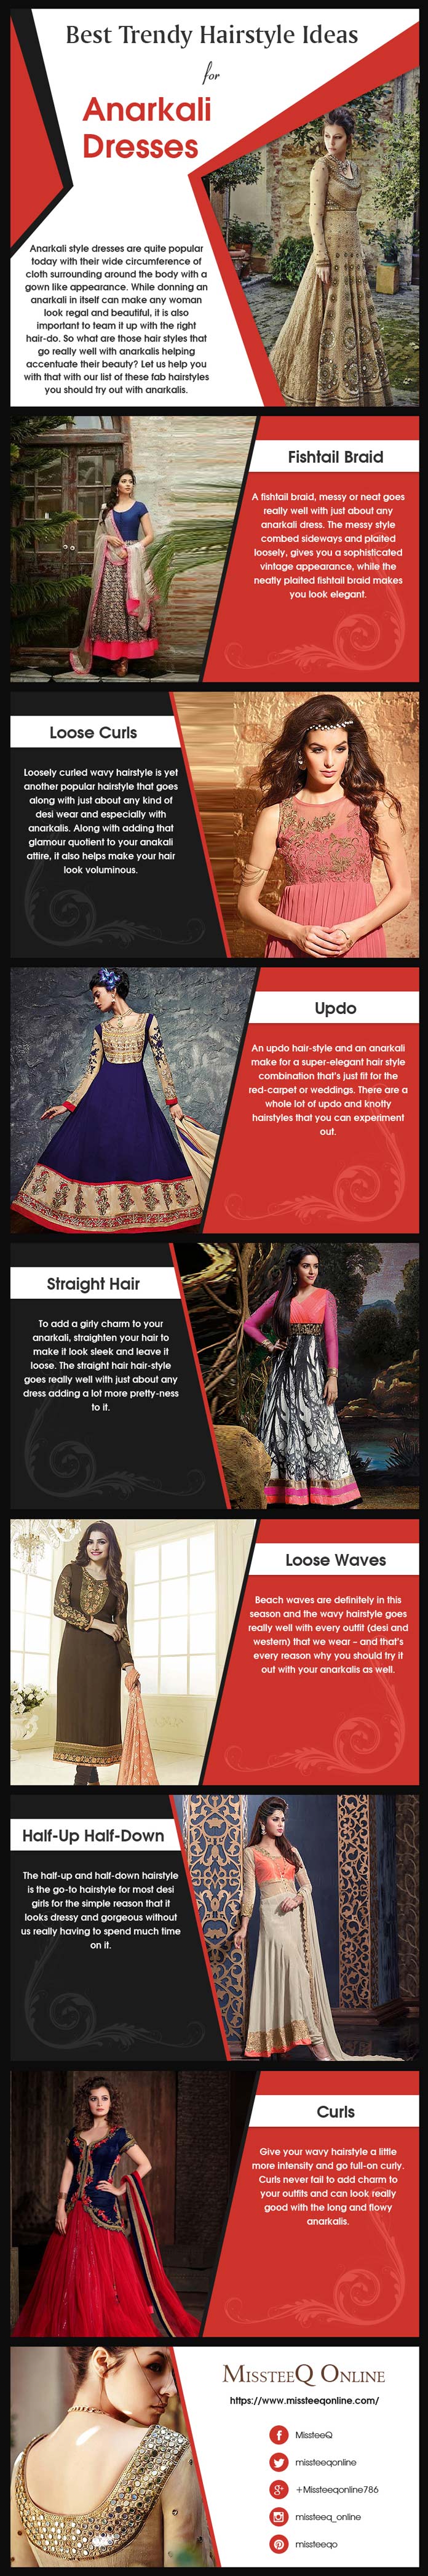 Best Trendy Hairstyle Ideas for Anarkali Dresses [Infographic] - Zigverve